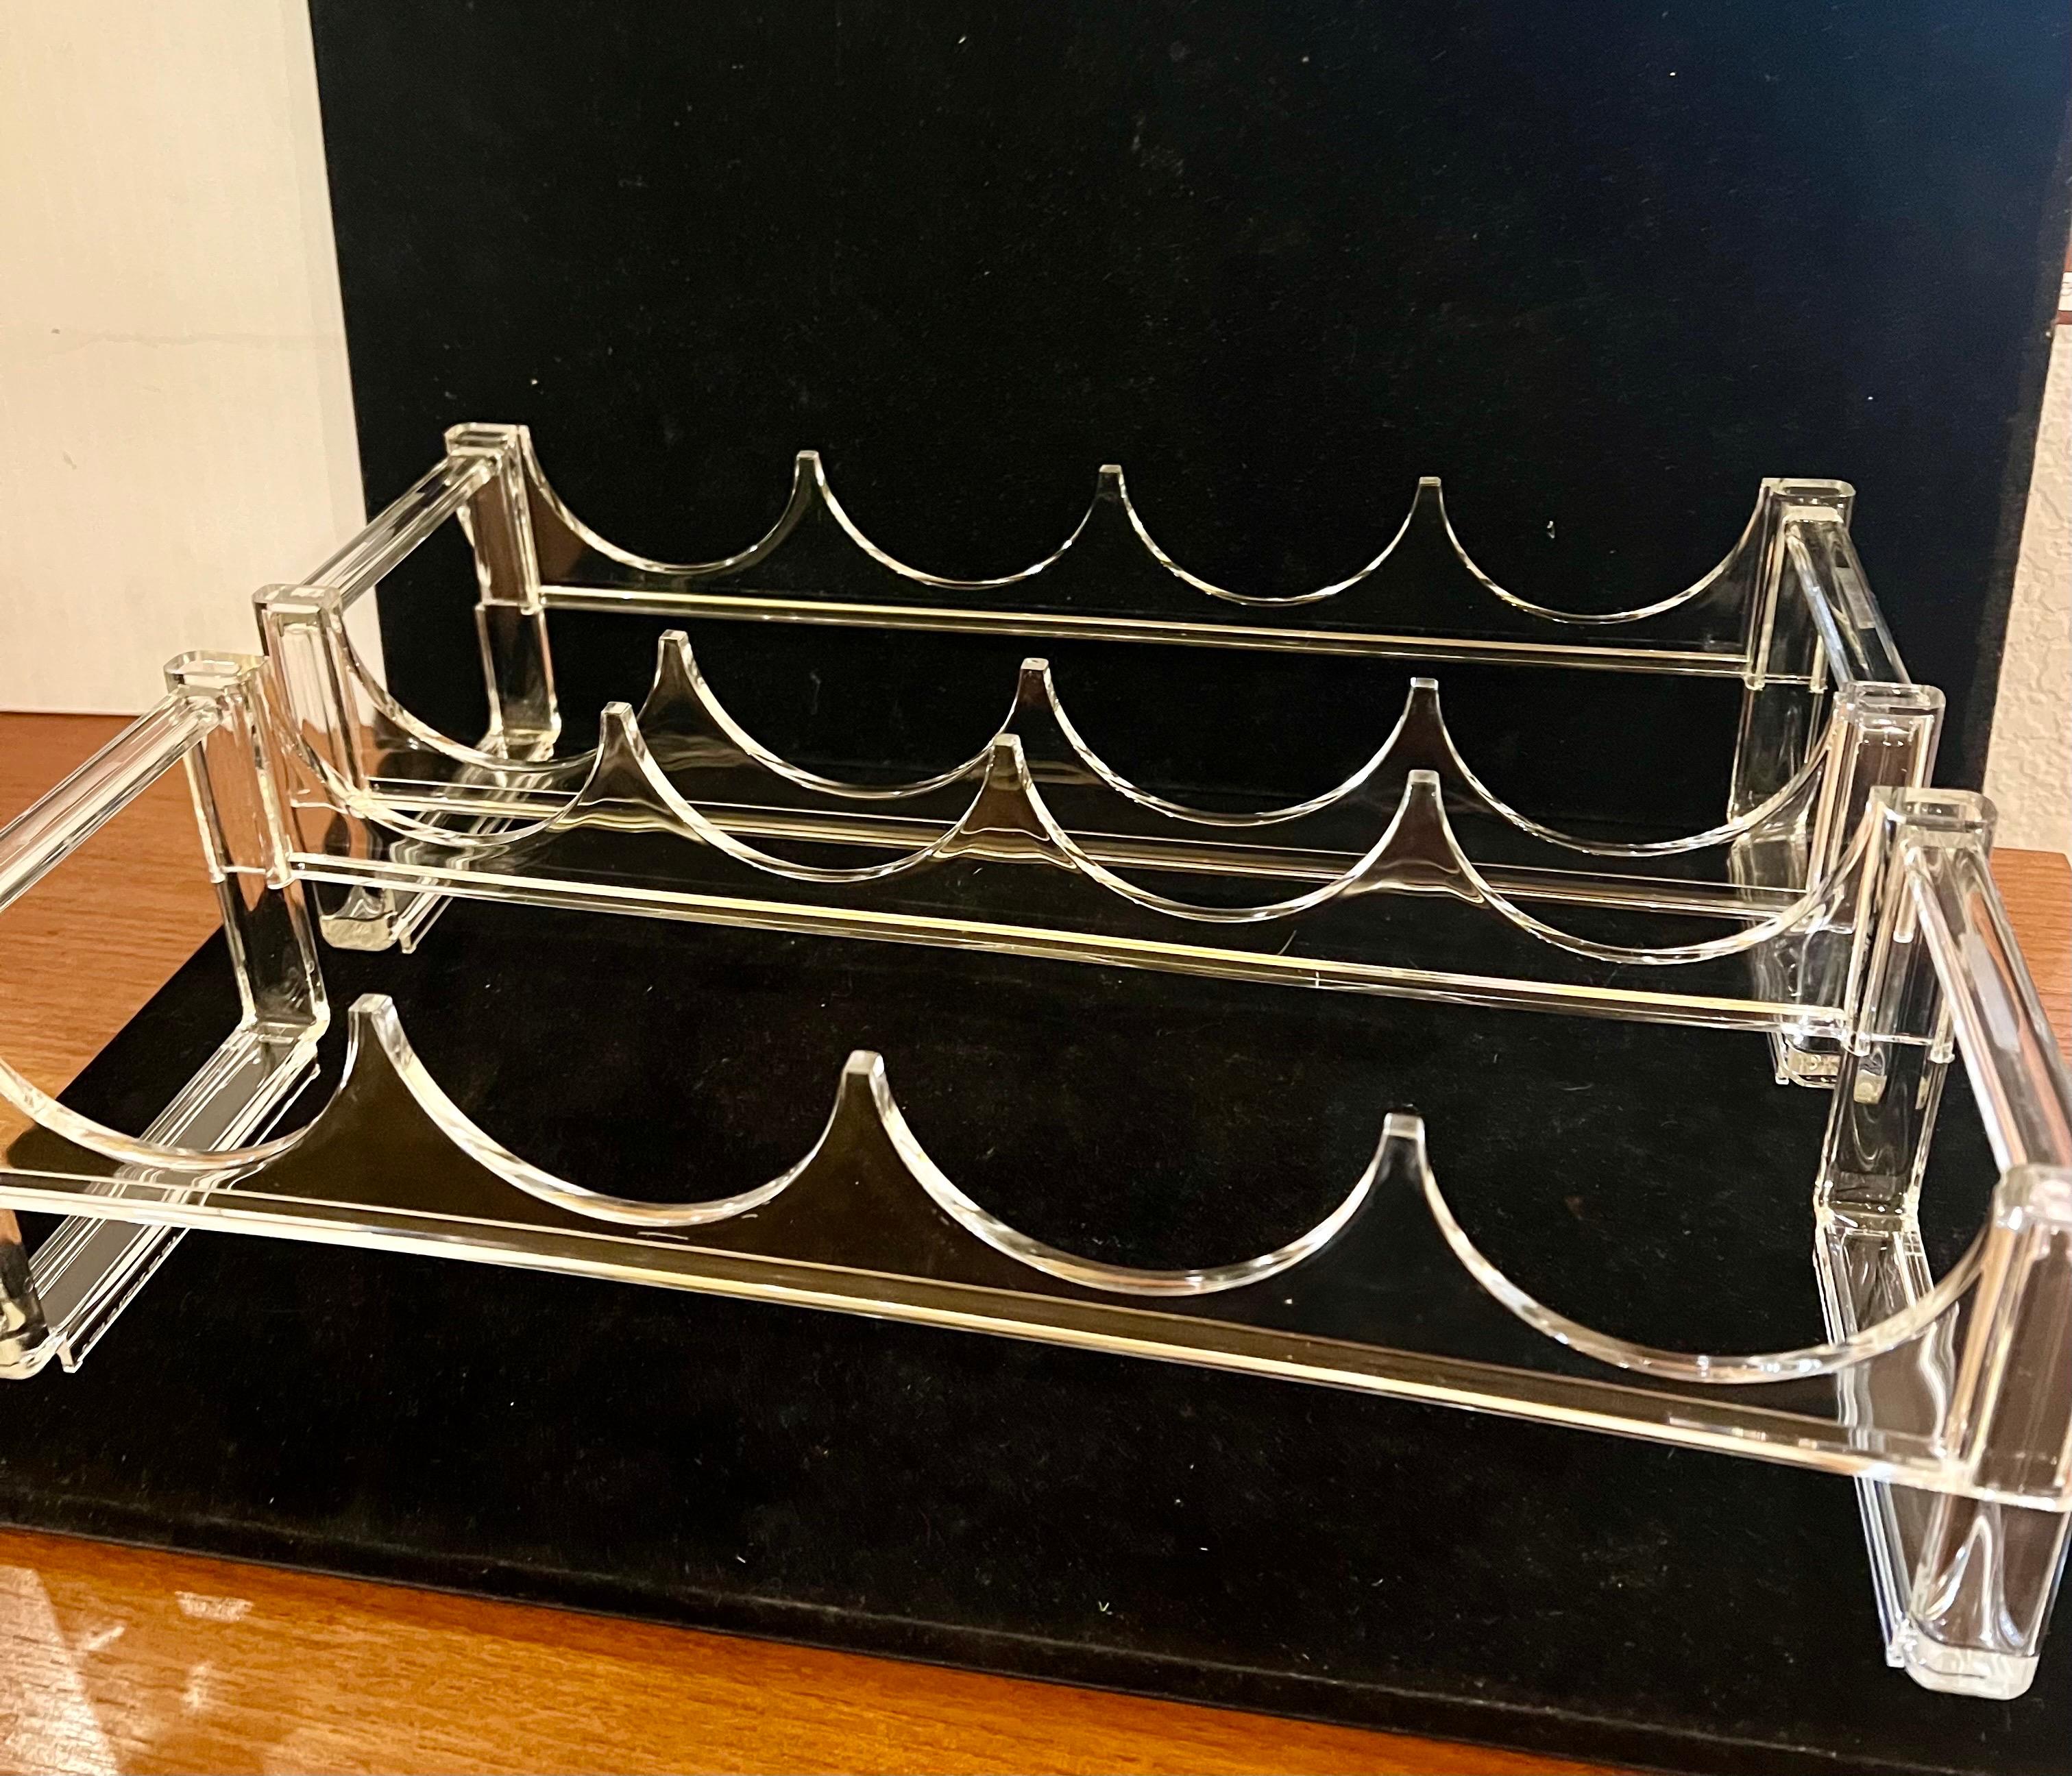 stackable lucite wine rack 8 bottle capacity includes 2 units hold up to 8 bottles, circa 1970's new never used.